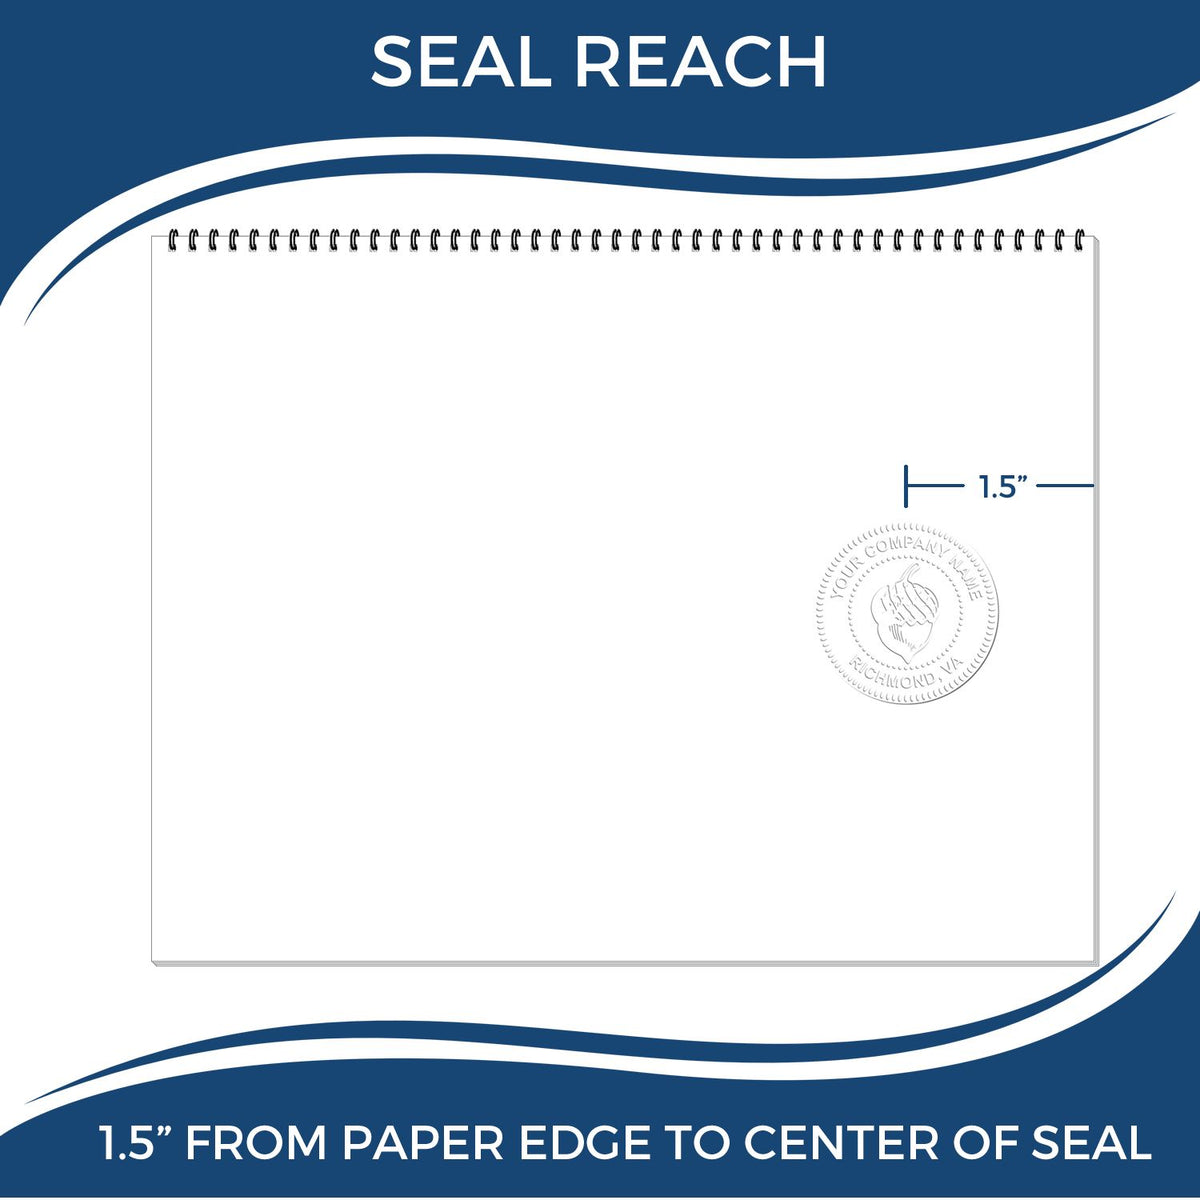 An infographic showing the seal reach which is represented by a ruler and a miniature seal image of the Montana Desk Surveyor Seal Embosser